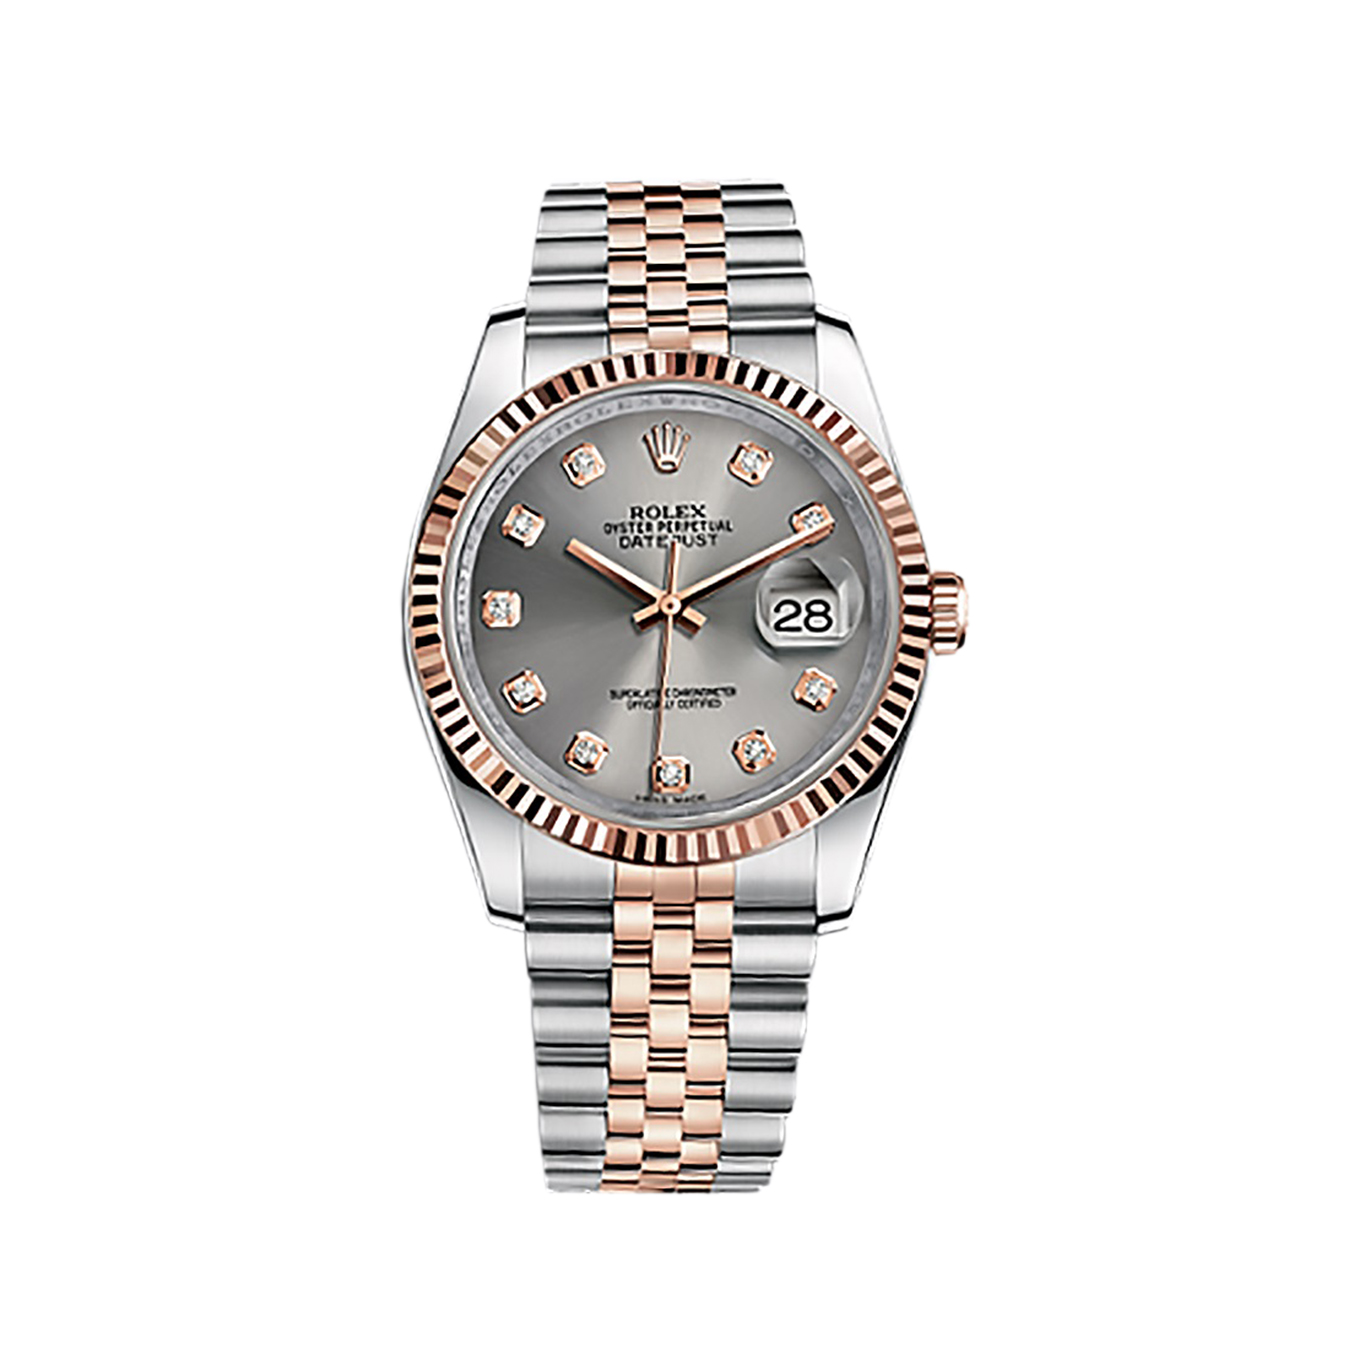 Datejust 36 116231 Rose Gold & Stainless Steel Watch (Steel Set with Diamonds)